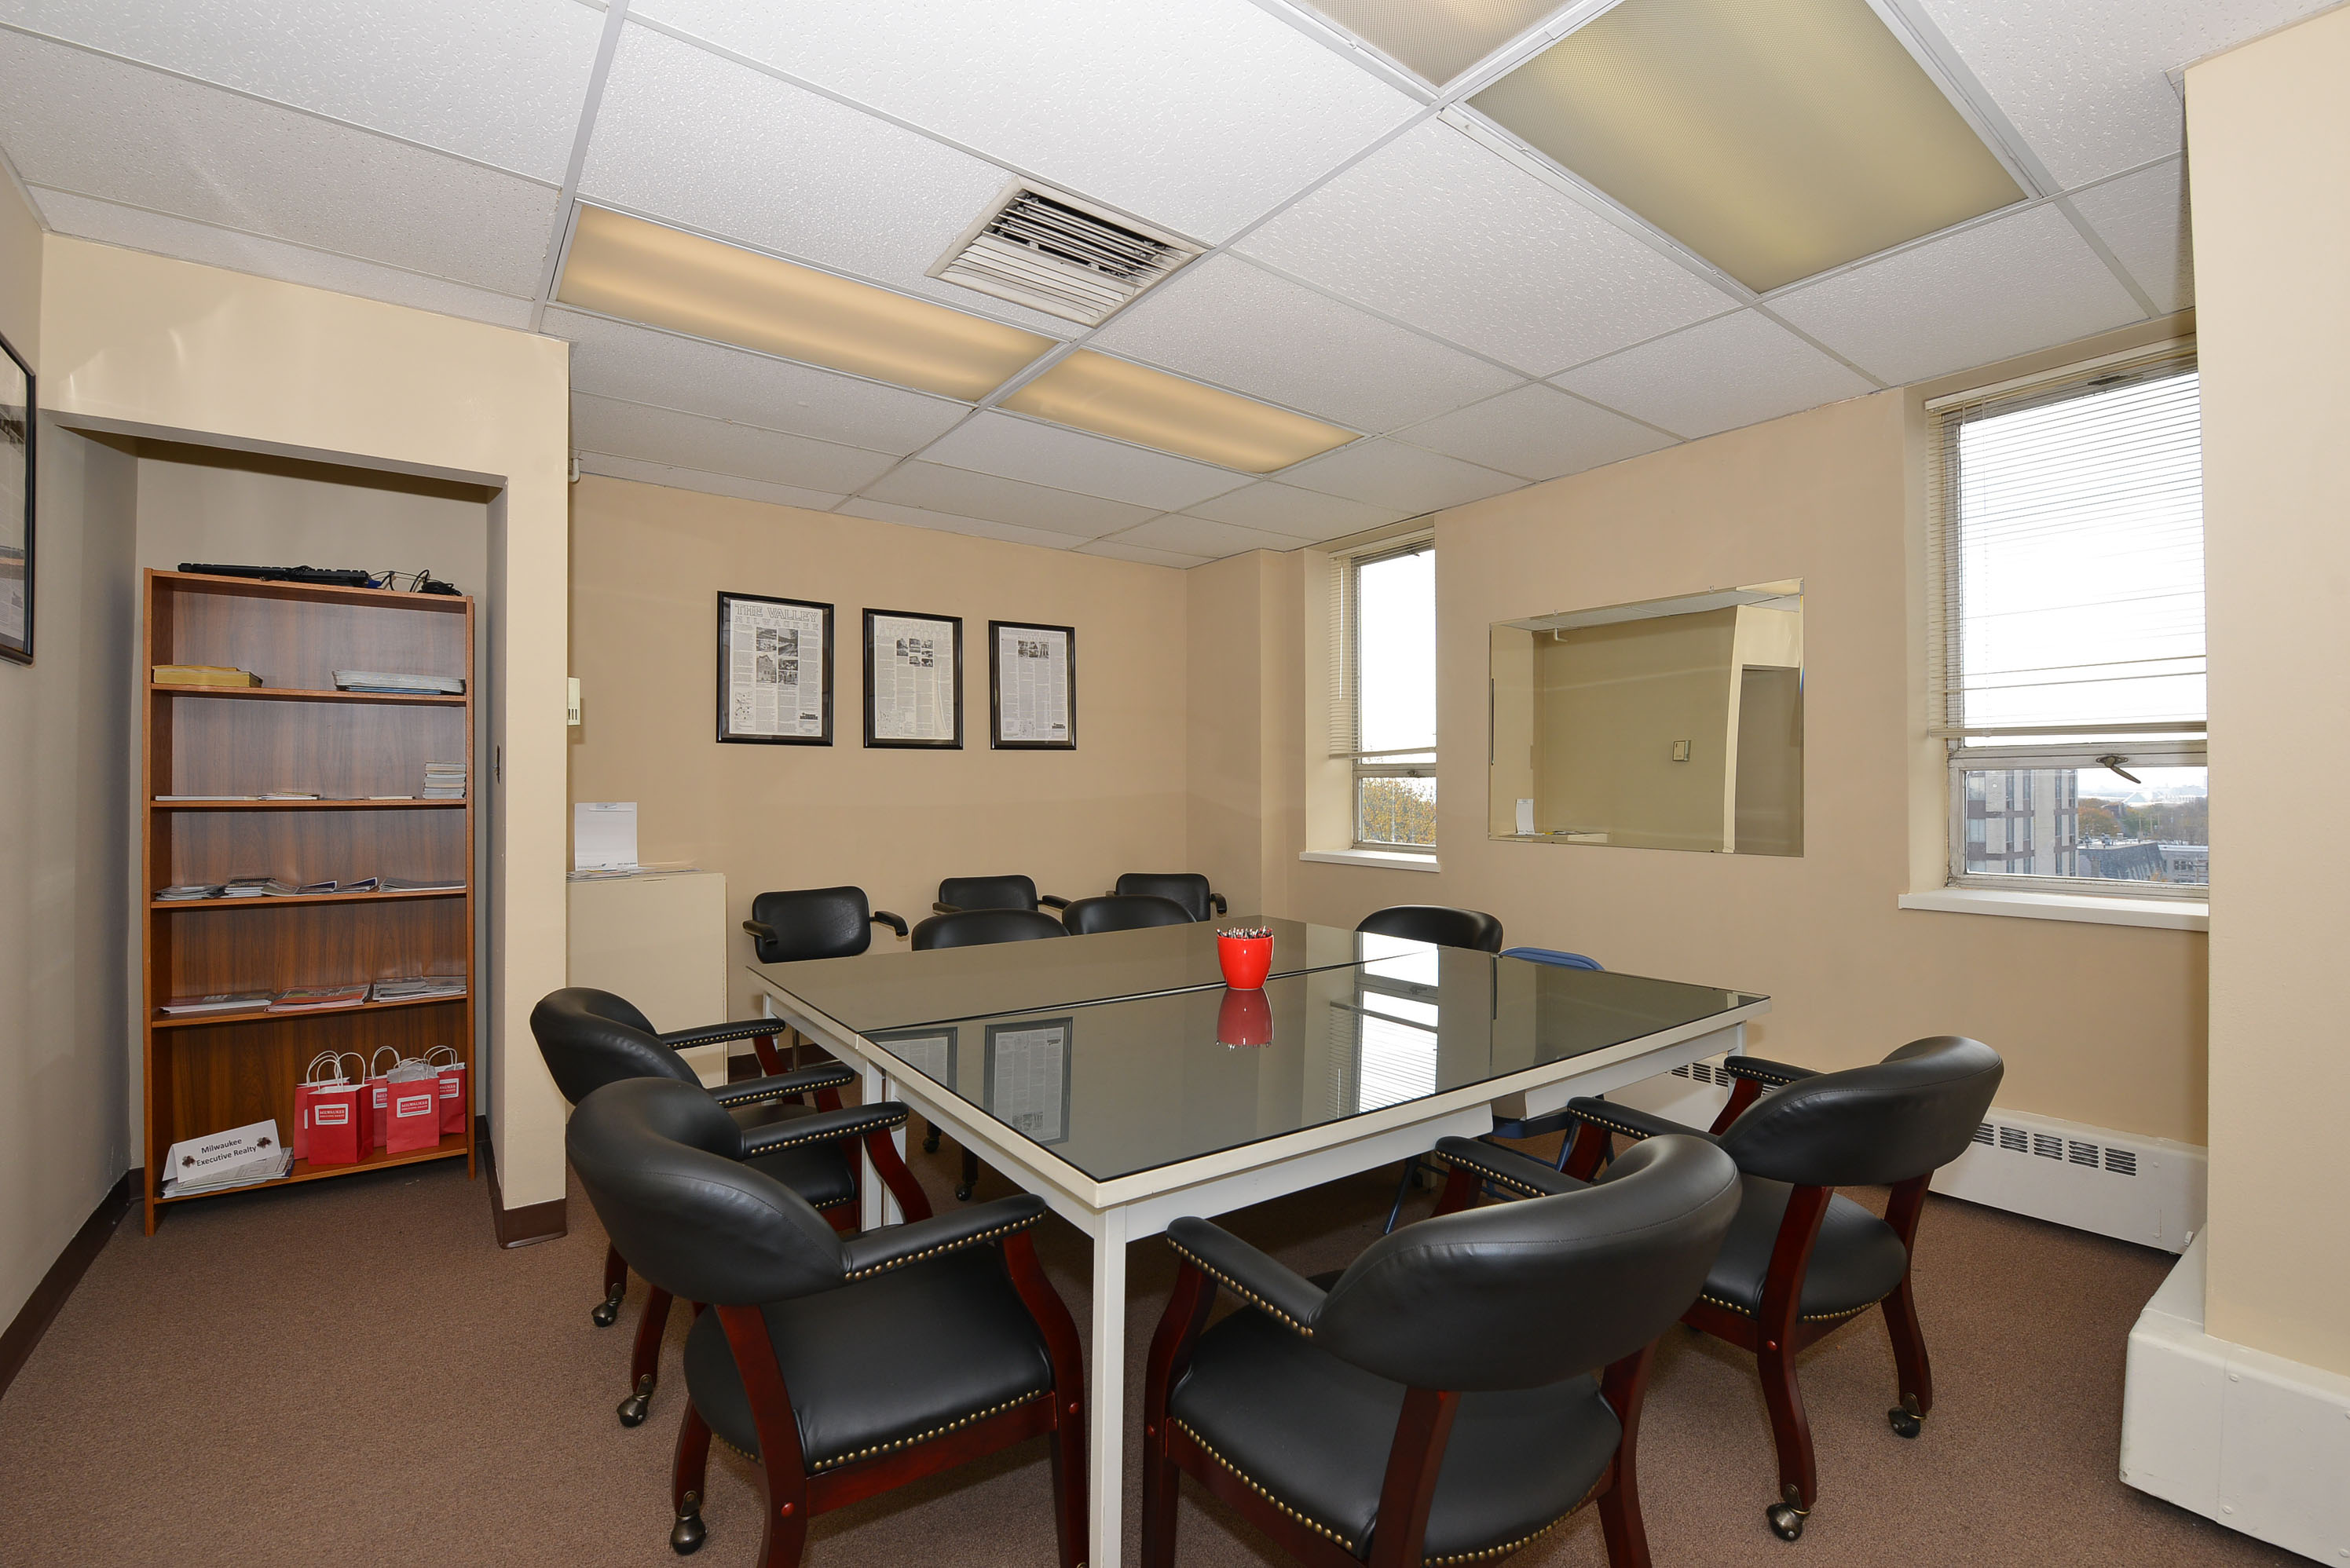 Office space in The Clock Tower Building. Photo courtesy of Carole Wehner.